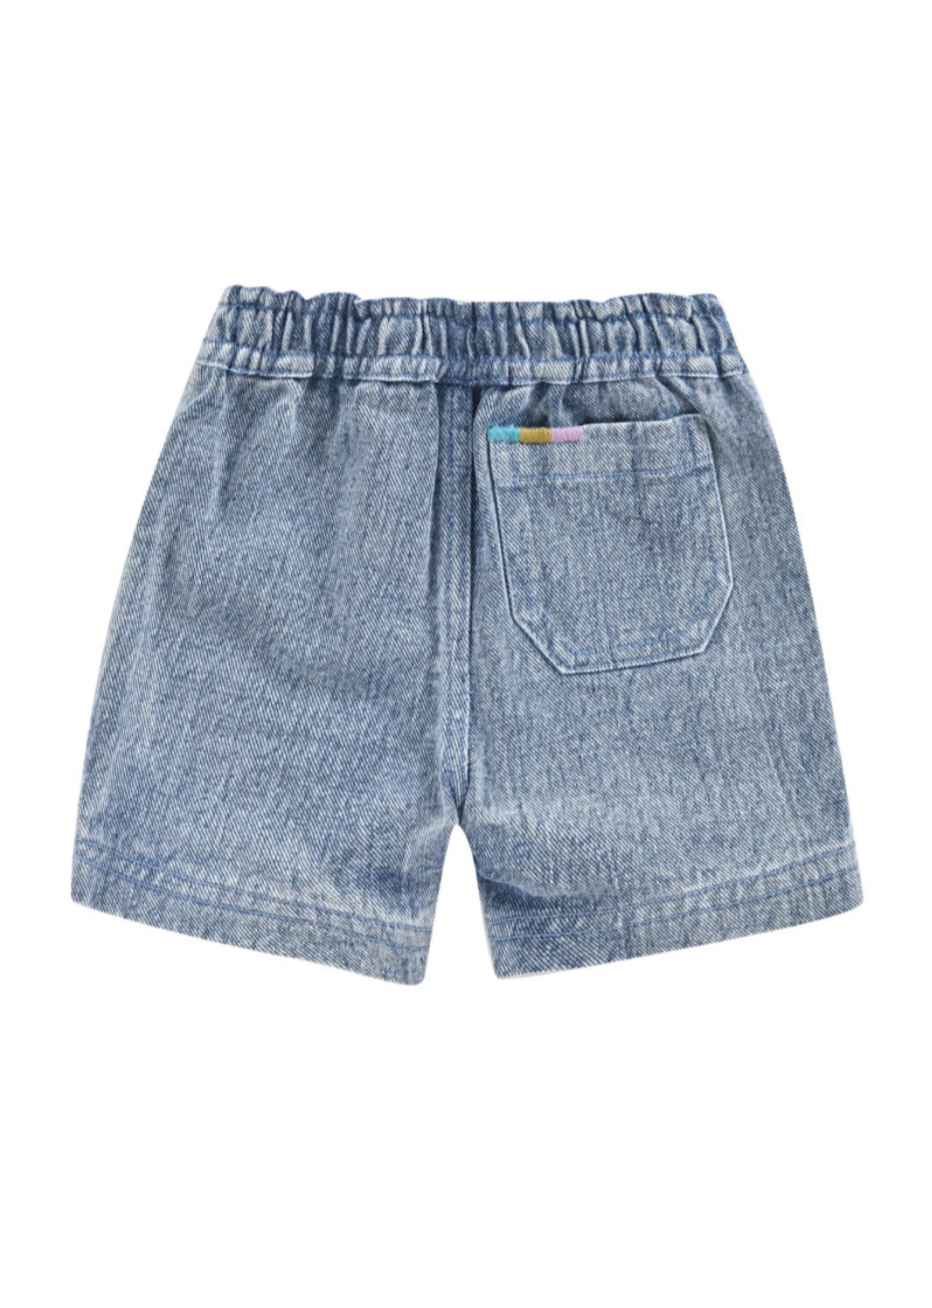 Light denim Bermuda shorts with an elasticized waist and drawstring with two-tone embroidered end. Made with 100% organic cotton. Louise misha obiki shorts in stone blue.